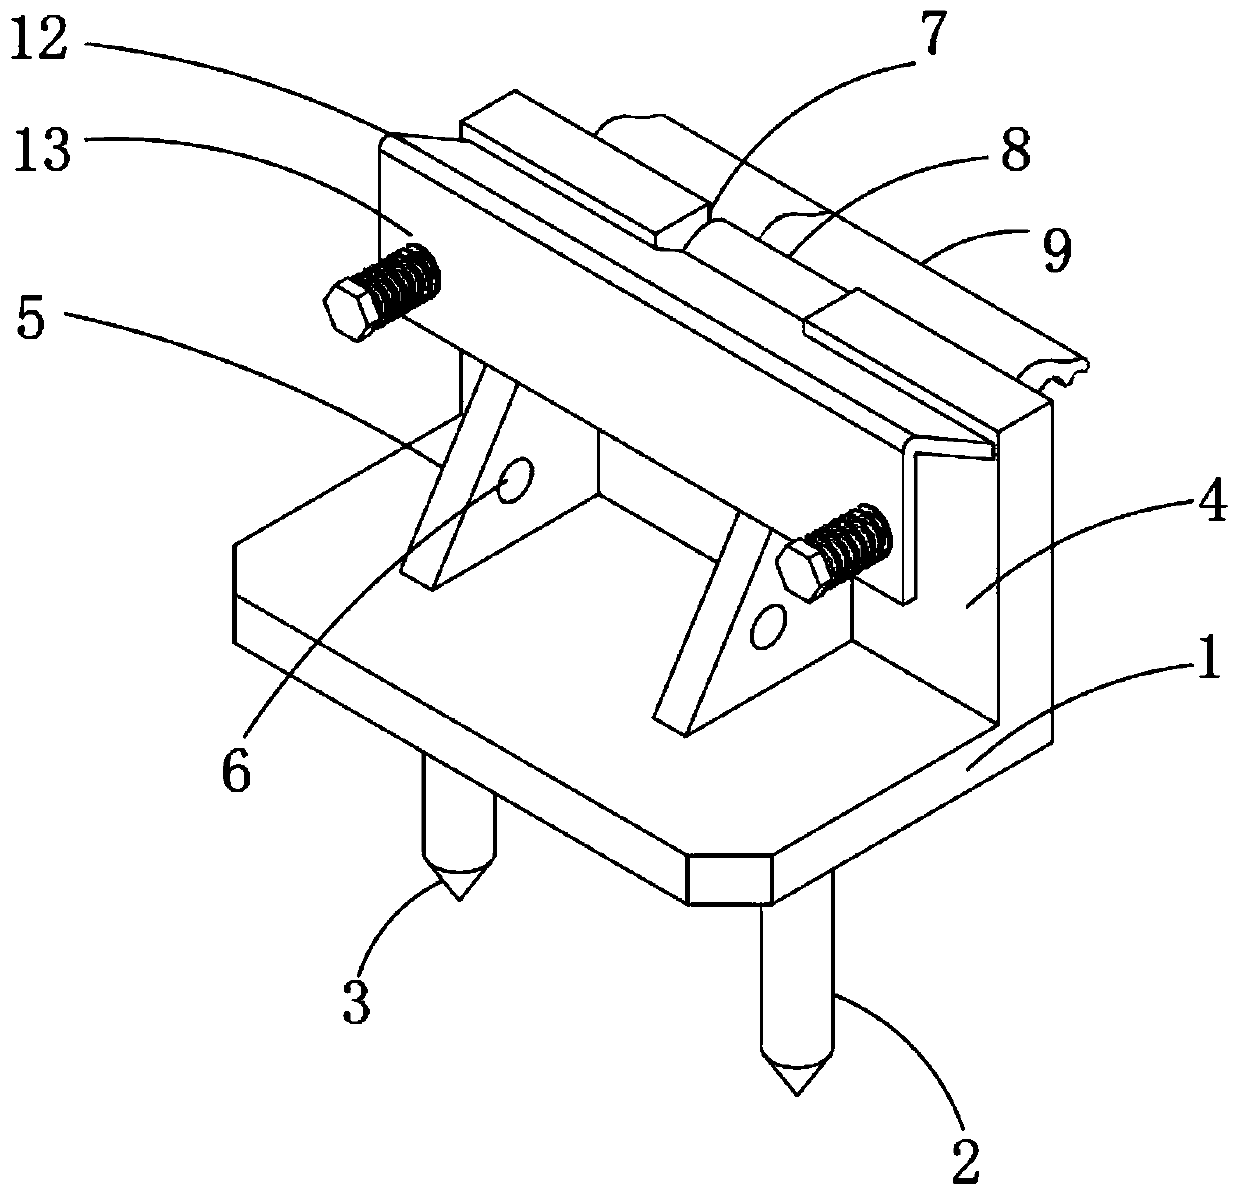 Buckling limiting device based on rail base plate